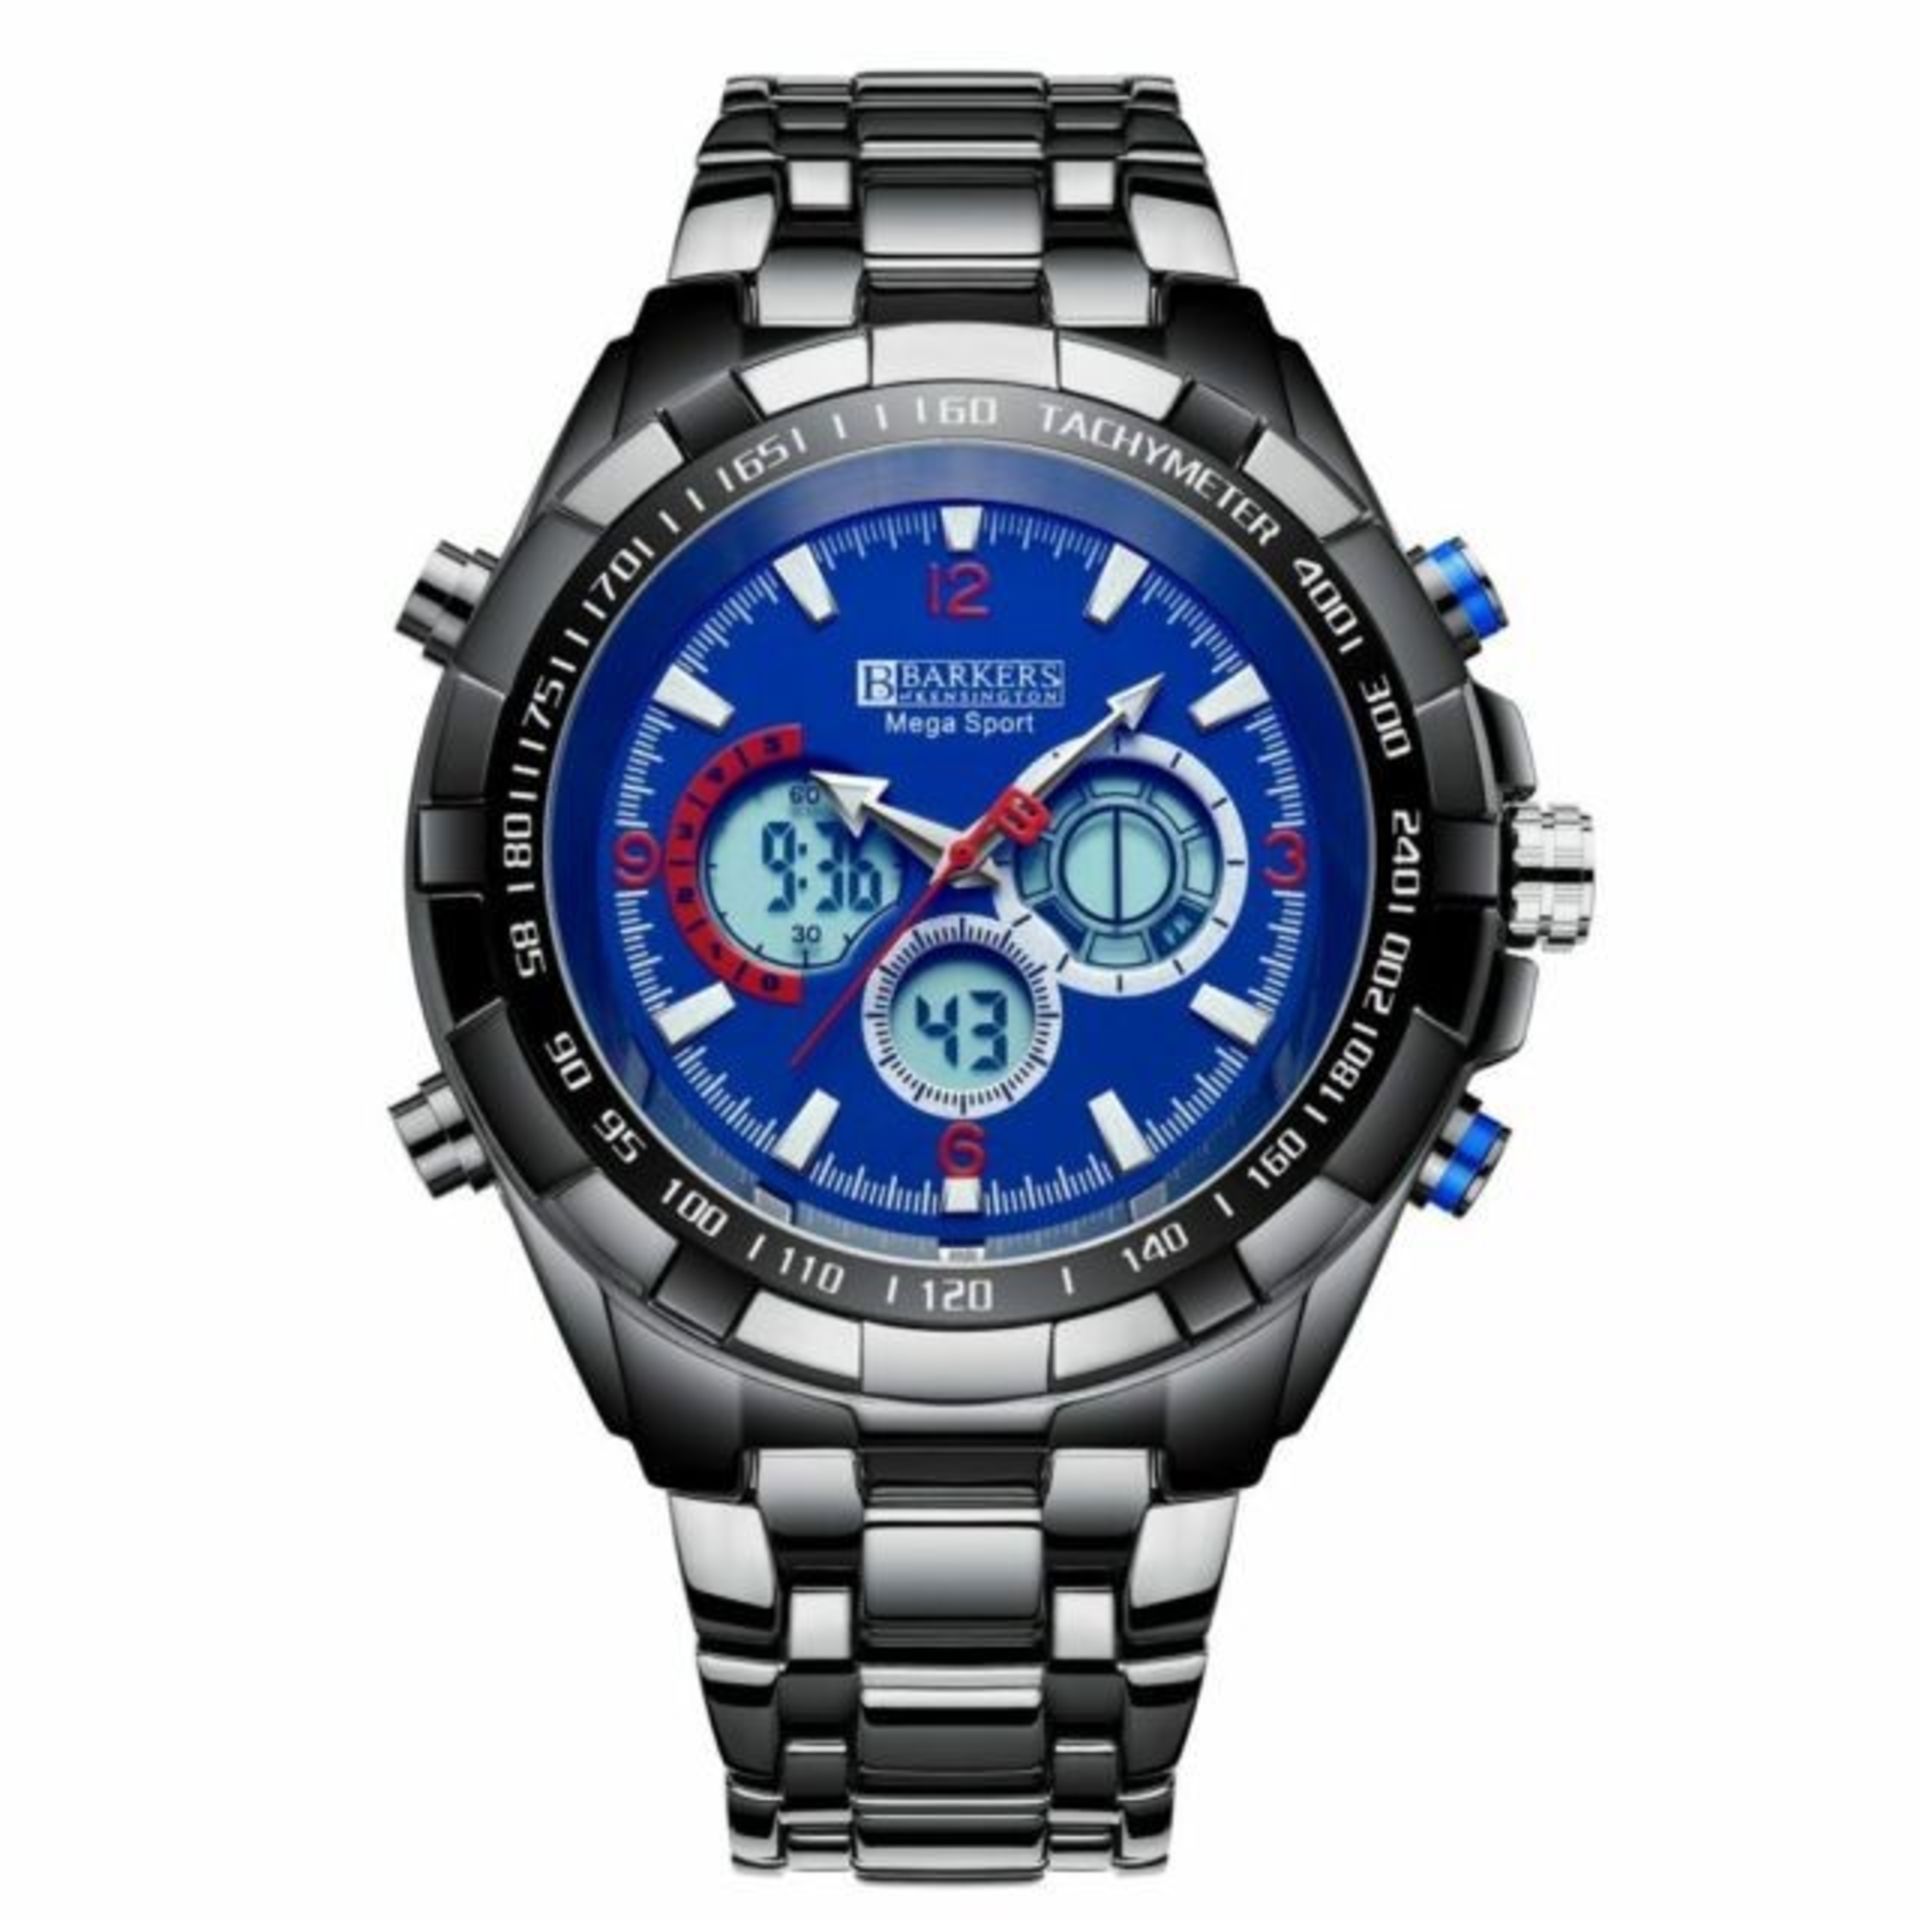 Barkers of Kensington Blue Mega Sports watch, New & boxed with a 5 year warranty included